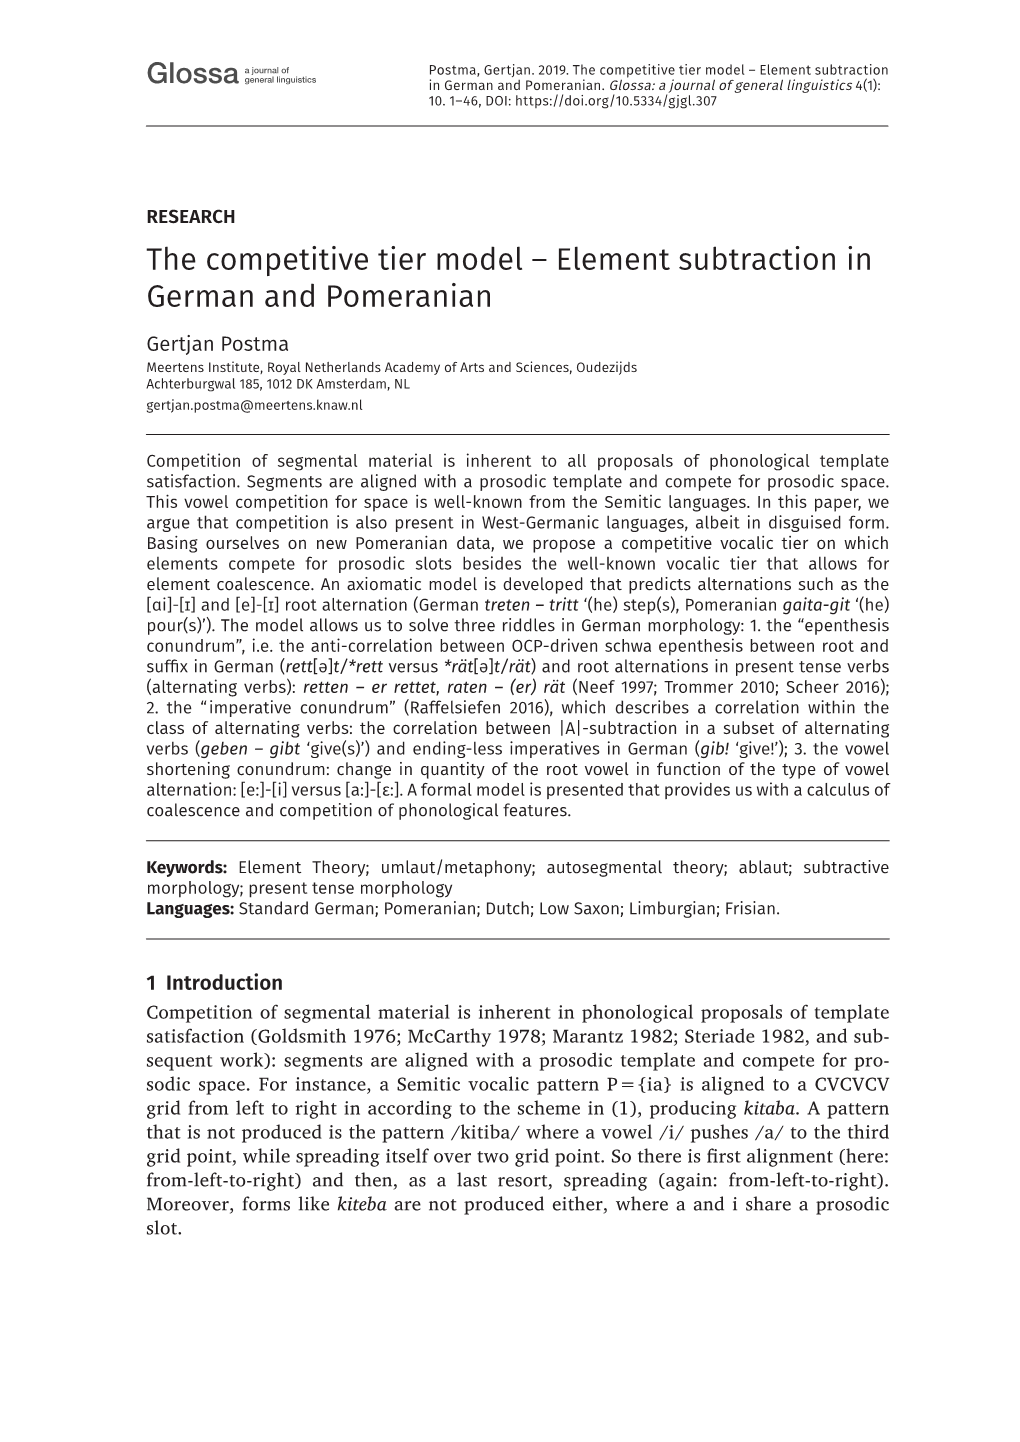 The Competitive Tier Model – Element Subtraction General Linguistics Glossa in German and Pomeranian